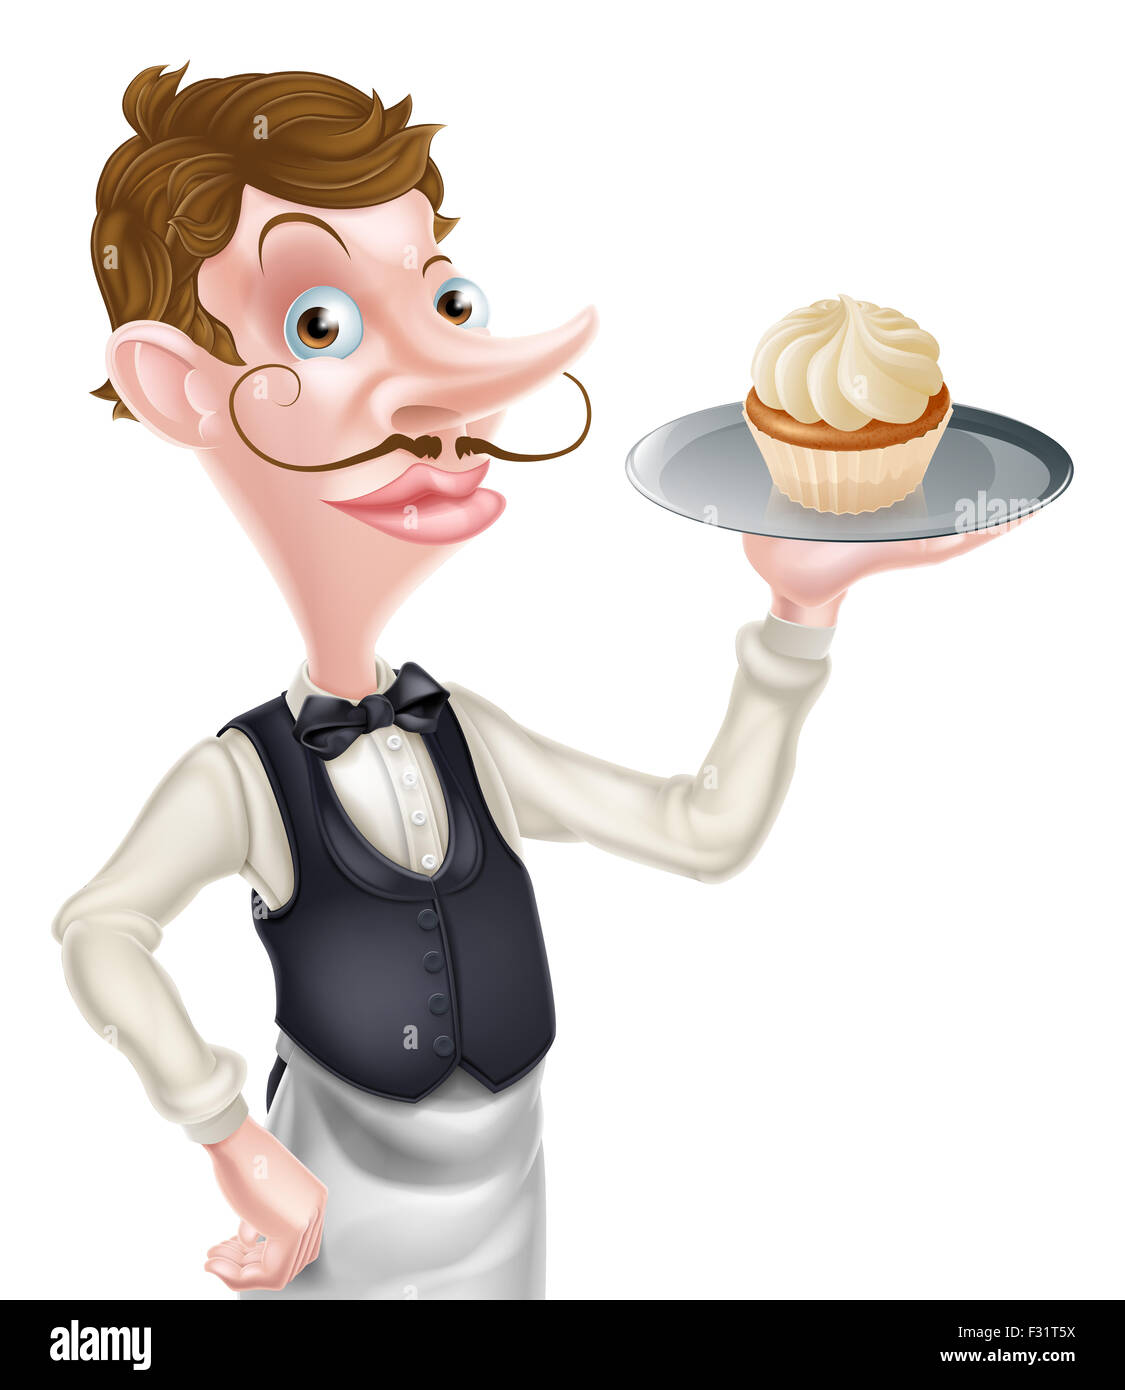 An illustration of a cartoon waiter or baker holding a tray with a cupcake on it Stock Photo